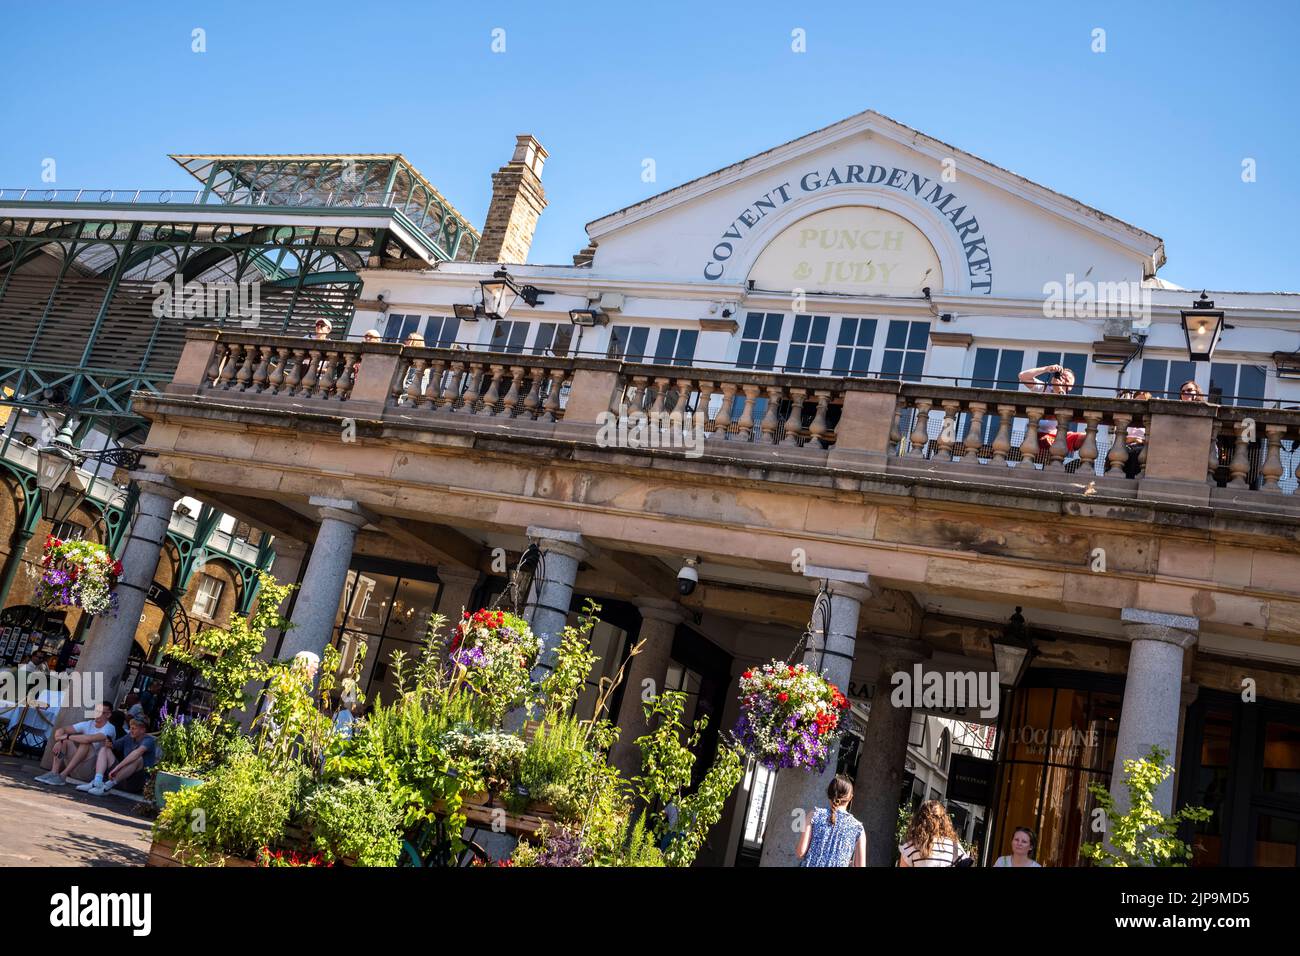 Covent Garden piaster on a summer day, London, England UK Stock Photo